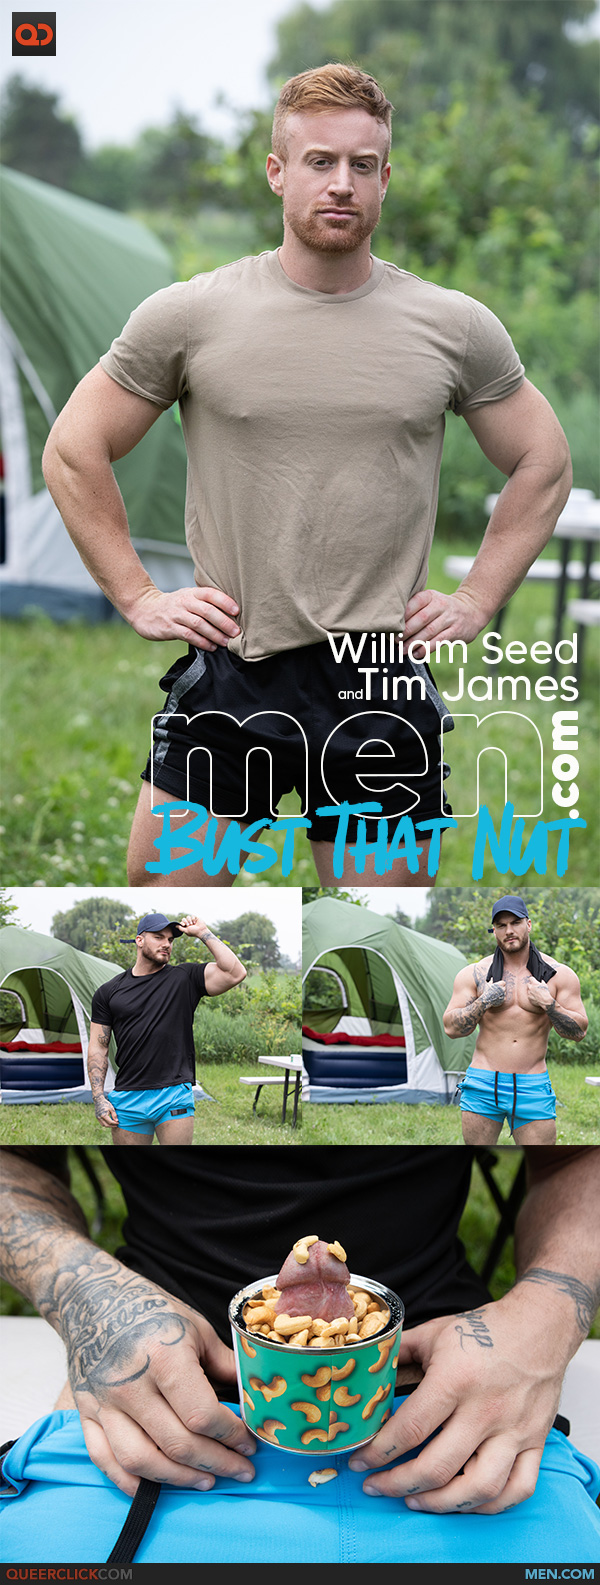 Men.com: Tim James and William Seed - Bust That Nut